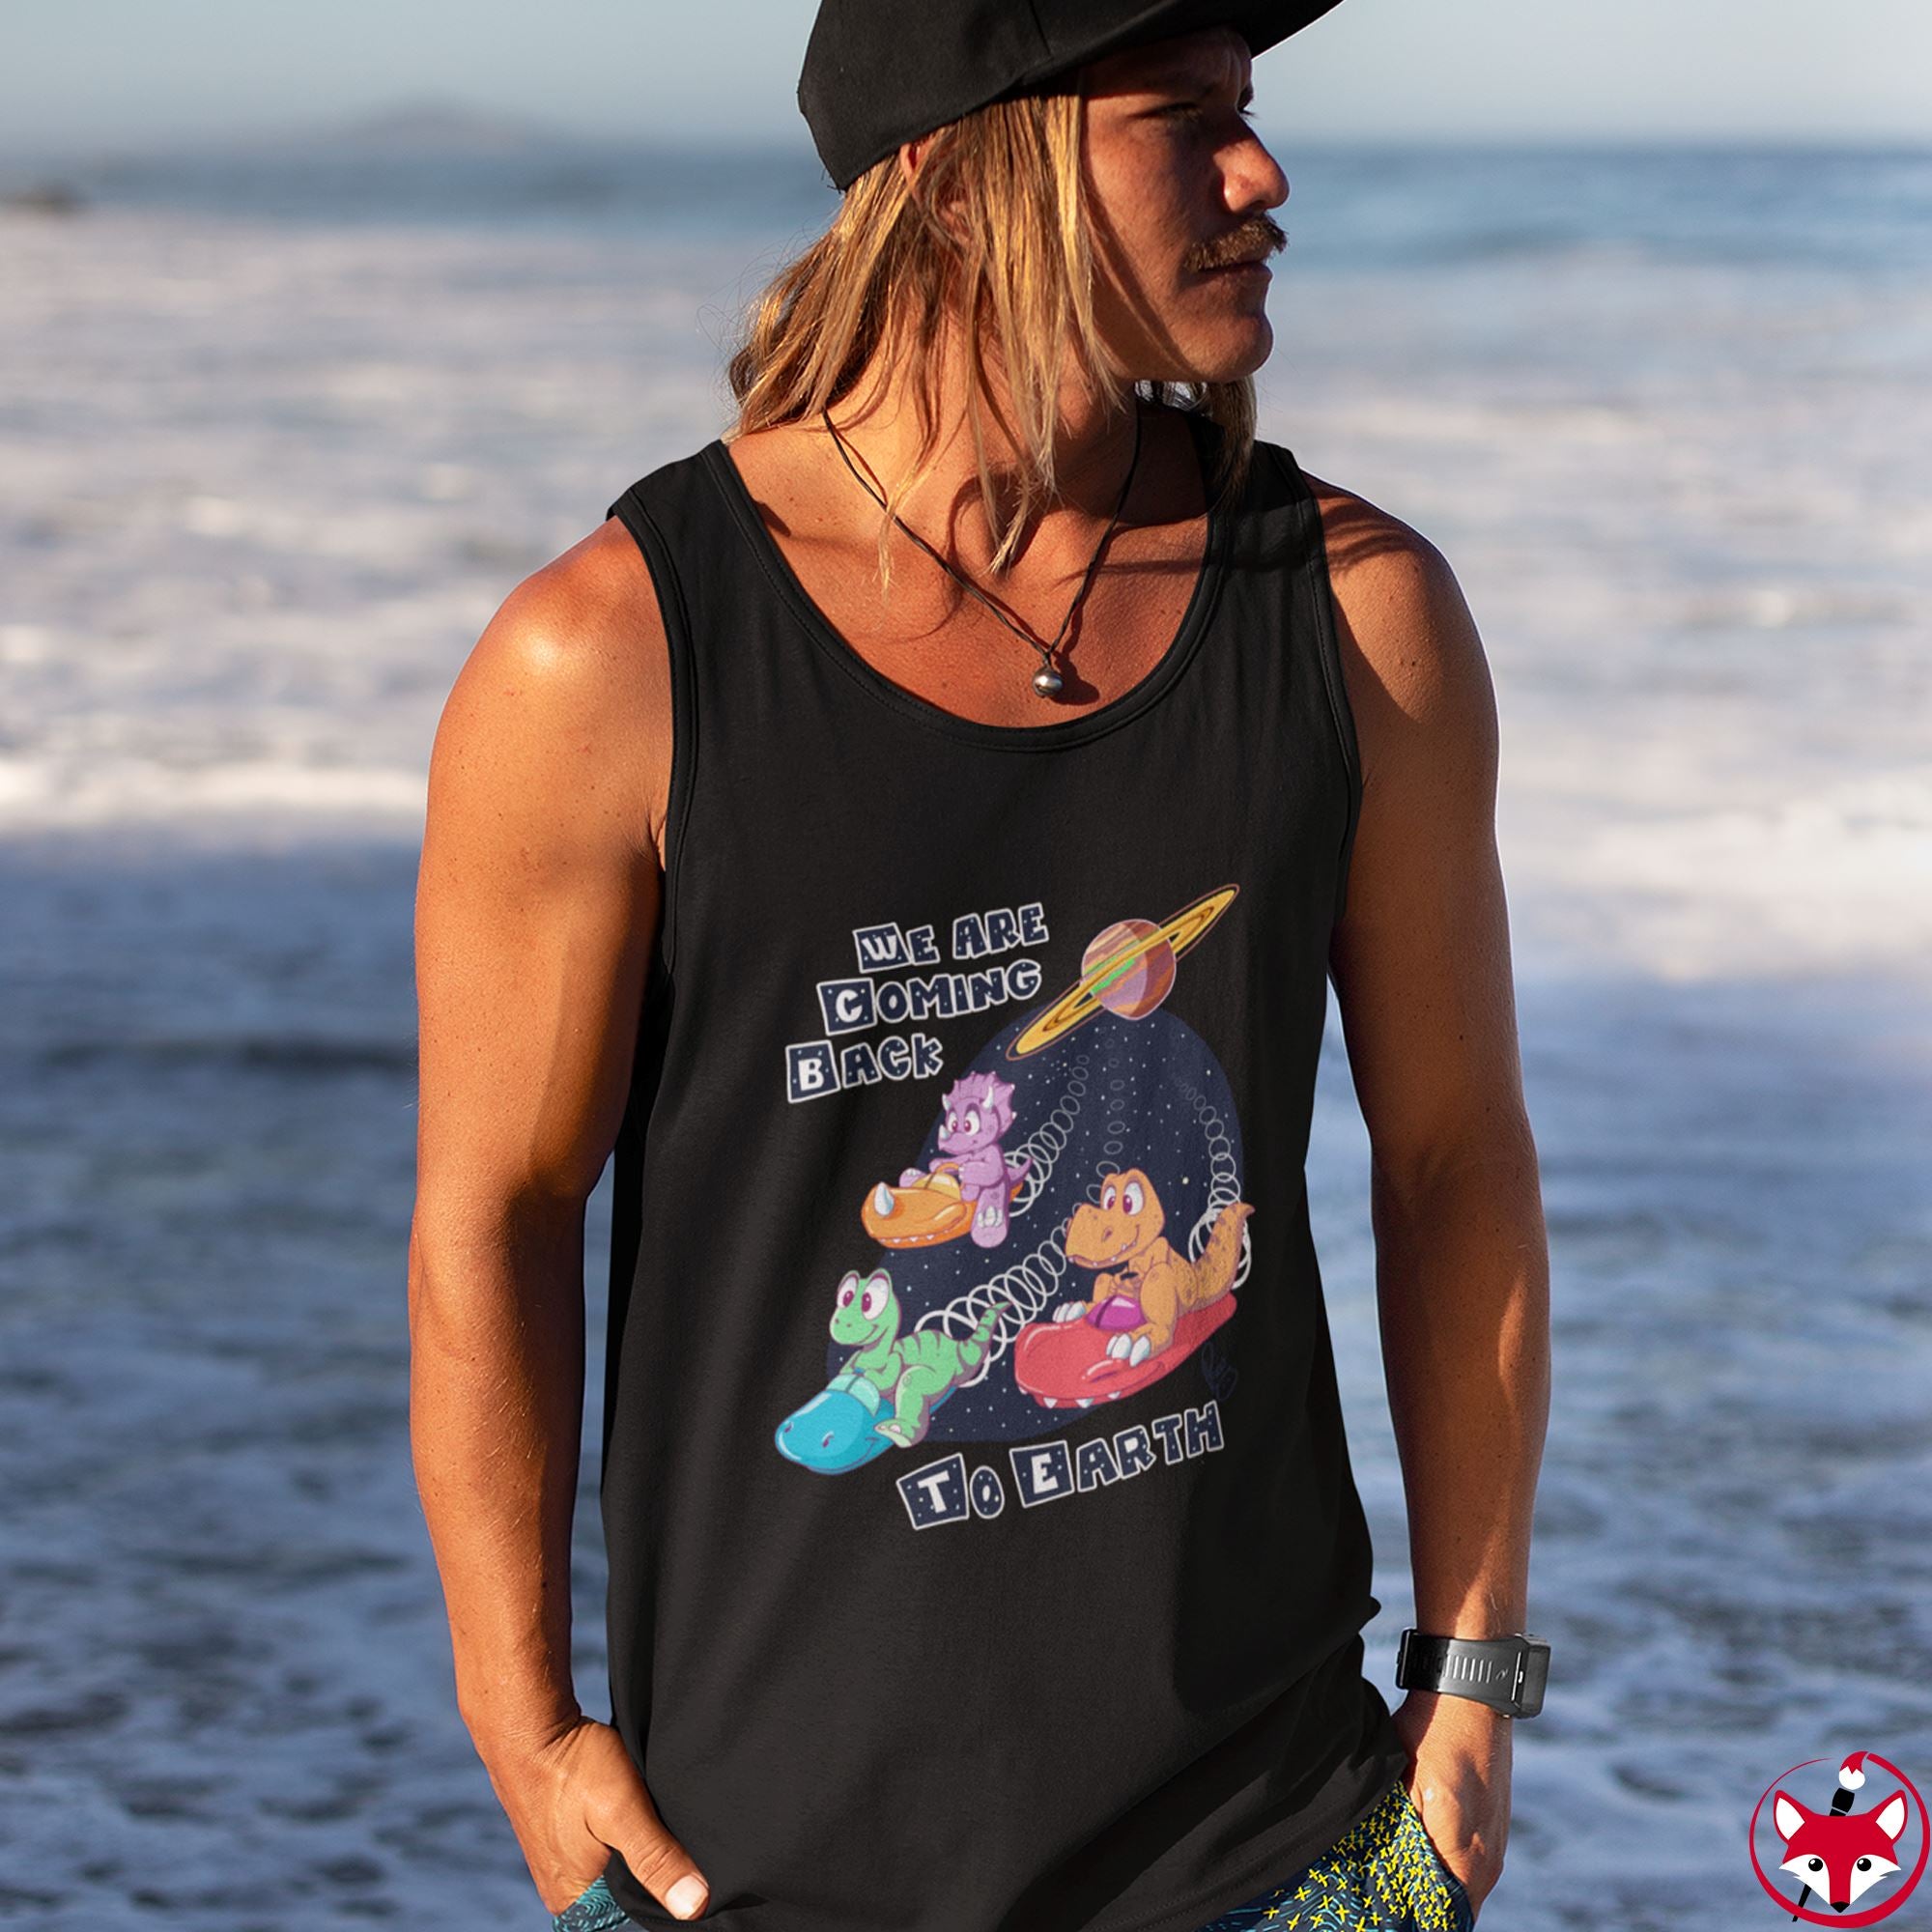 We are coming back to Earth - Tank Top Tank Top Paco Panda 